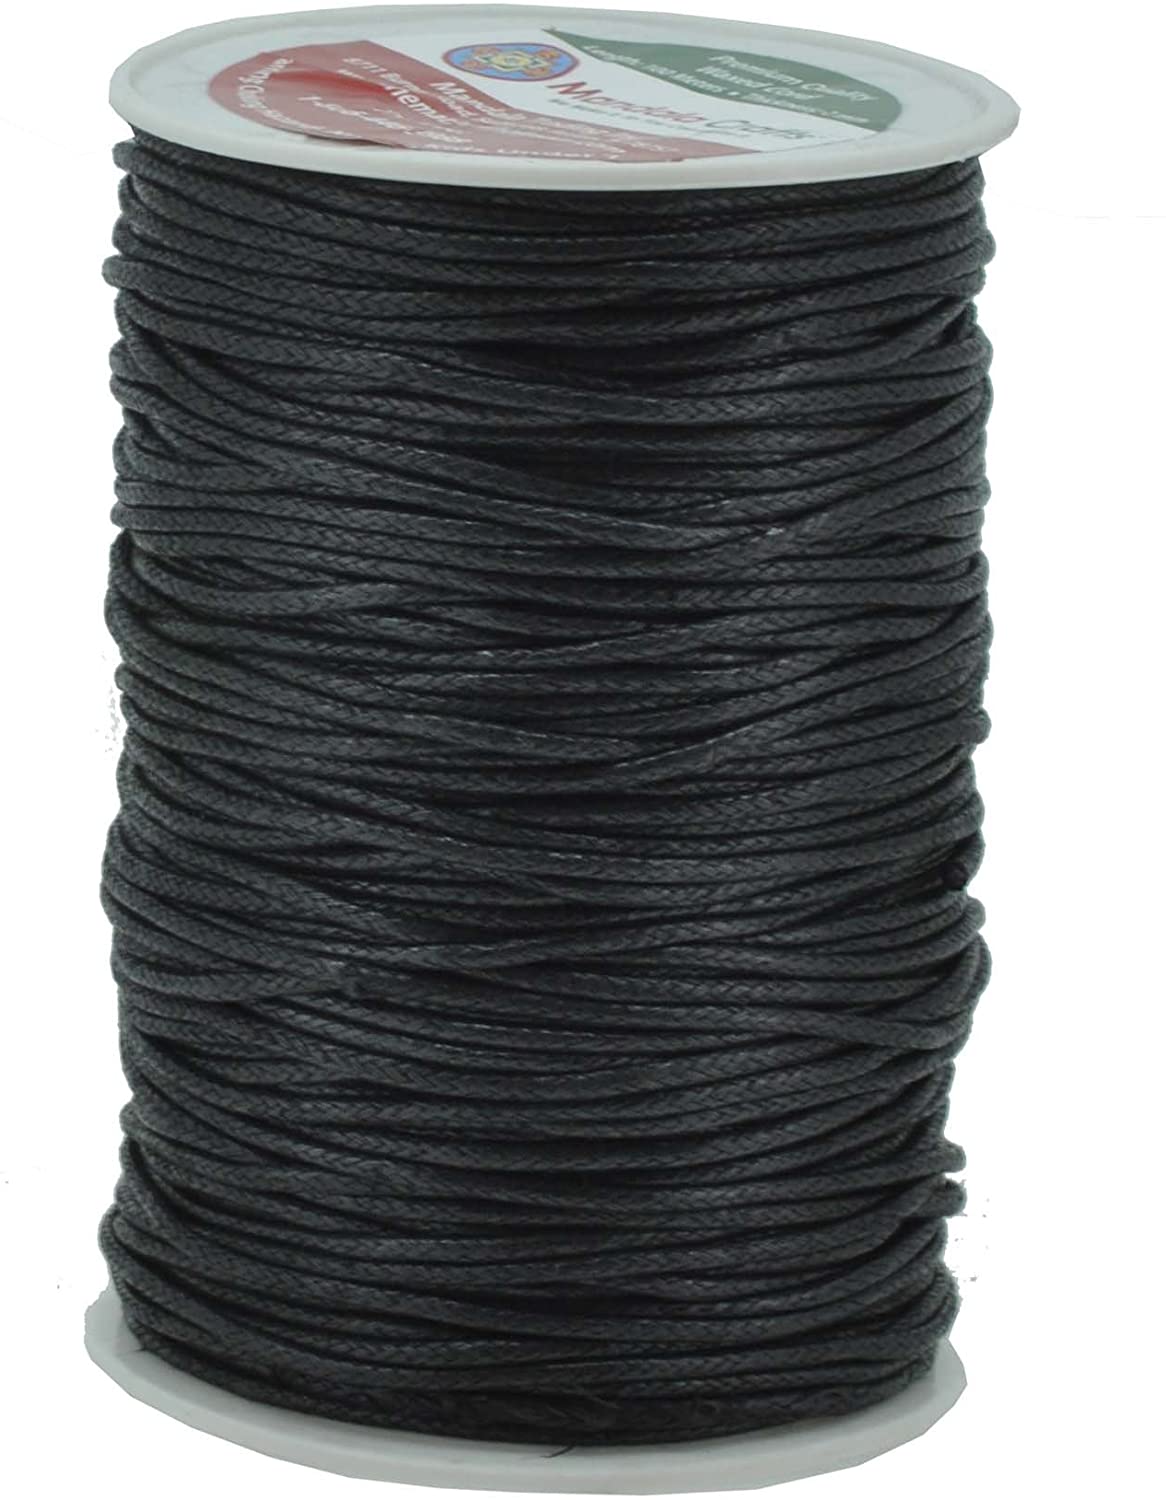 35 Colors 1mm Waxed Polyester Cord Bracelet Cord Wax Coated String